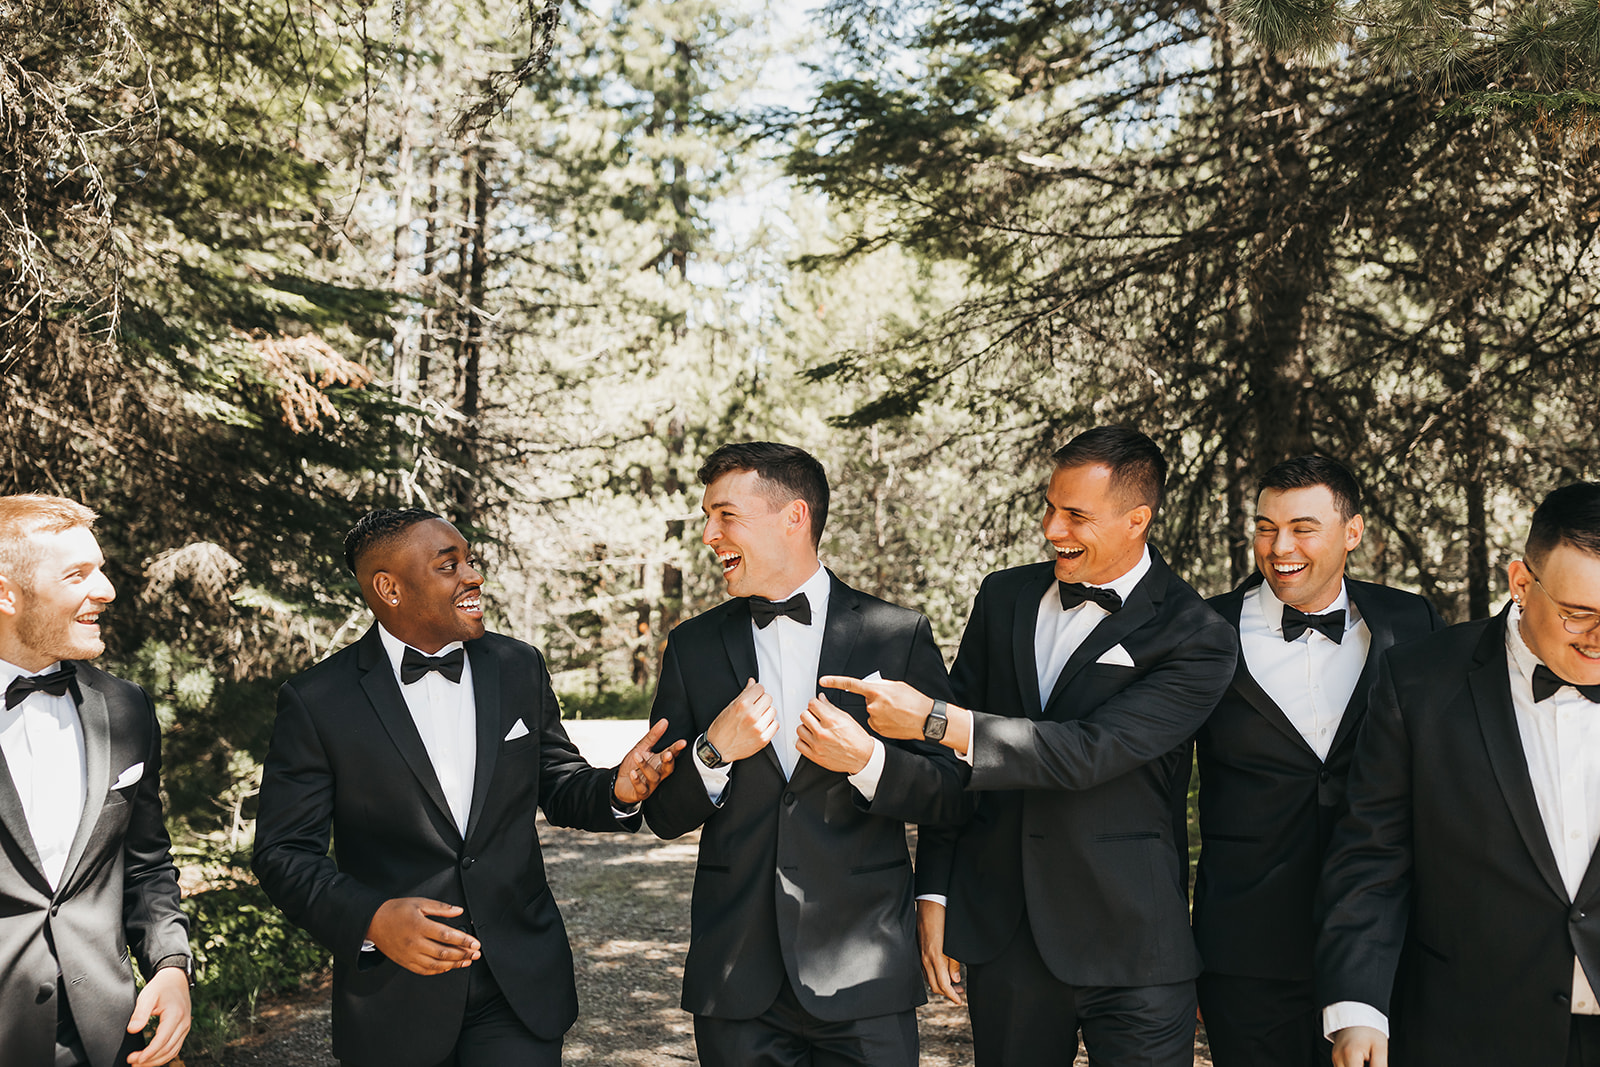 Groom and groomsmen talking before wedding ceremony at private lake house.